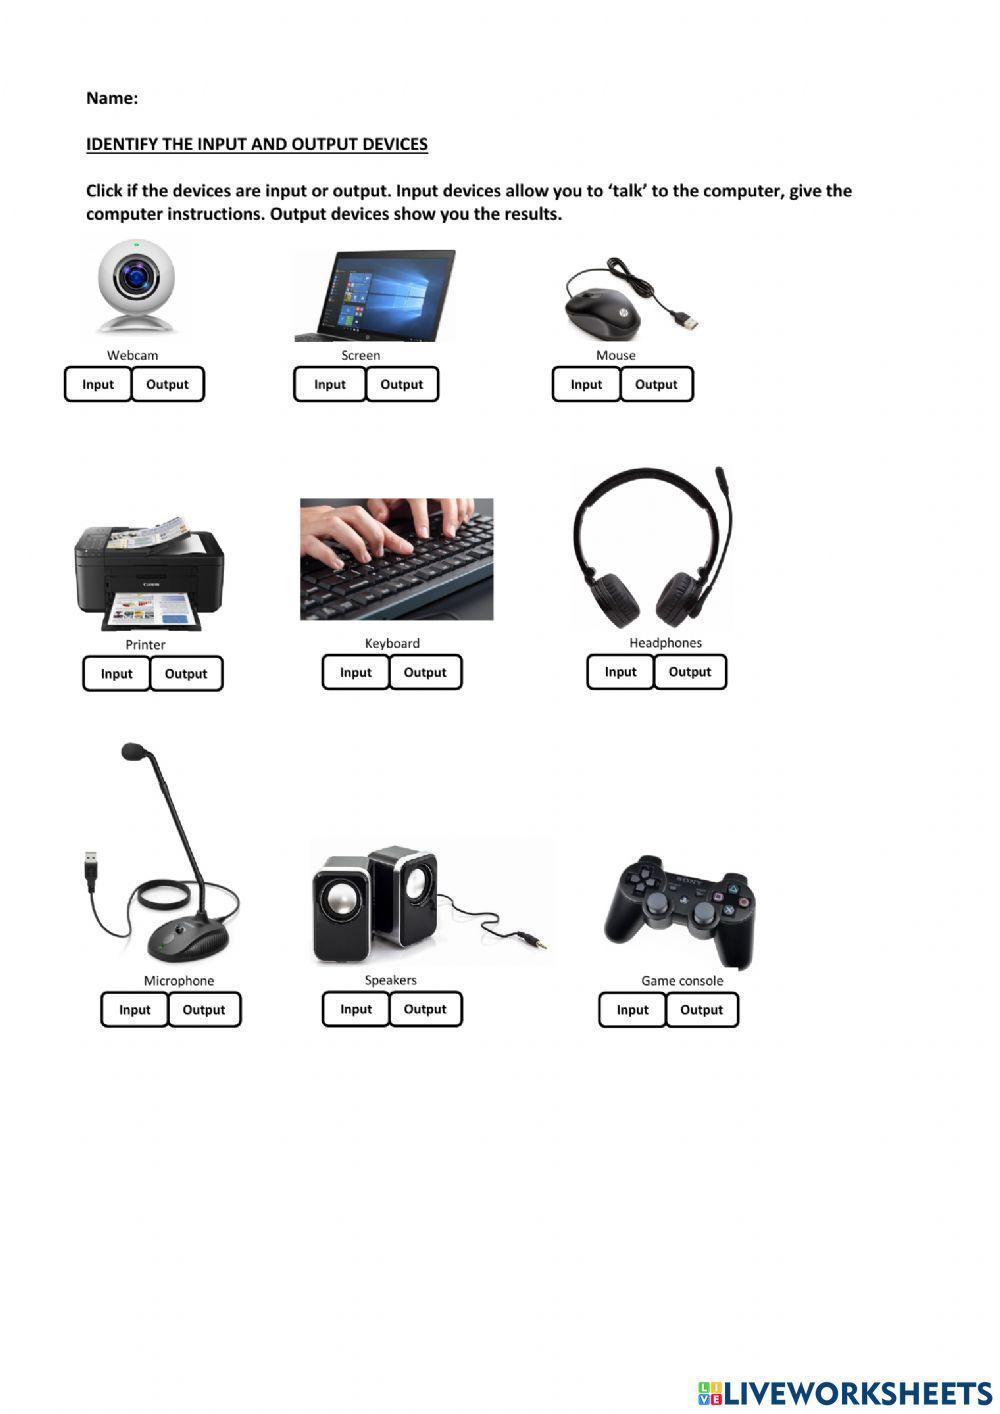 Identify the input and output devices